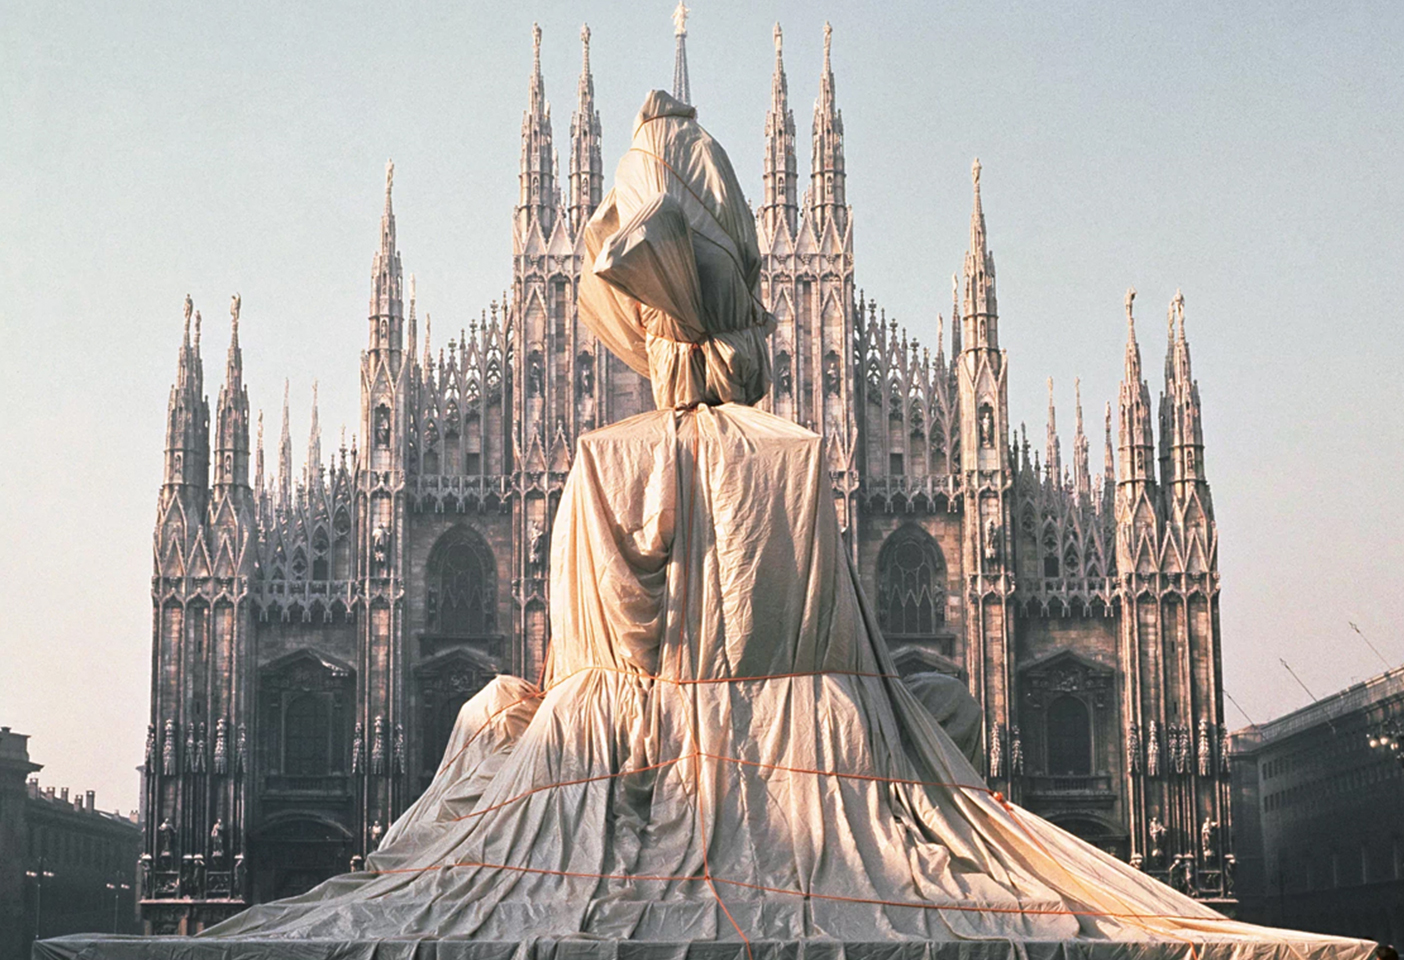 Christo and Jeanne-Claude's wrapped monument to Vittorio Emanuele II in Milan’s Piazza del Duomo in 1970. Photography by Shunk-Kender © 1970 Christo and Jeanne-Claude Foundation and J. Paul Getty Trust.